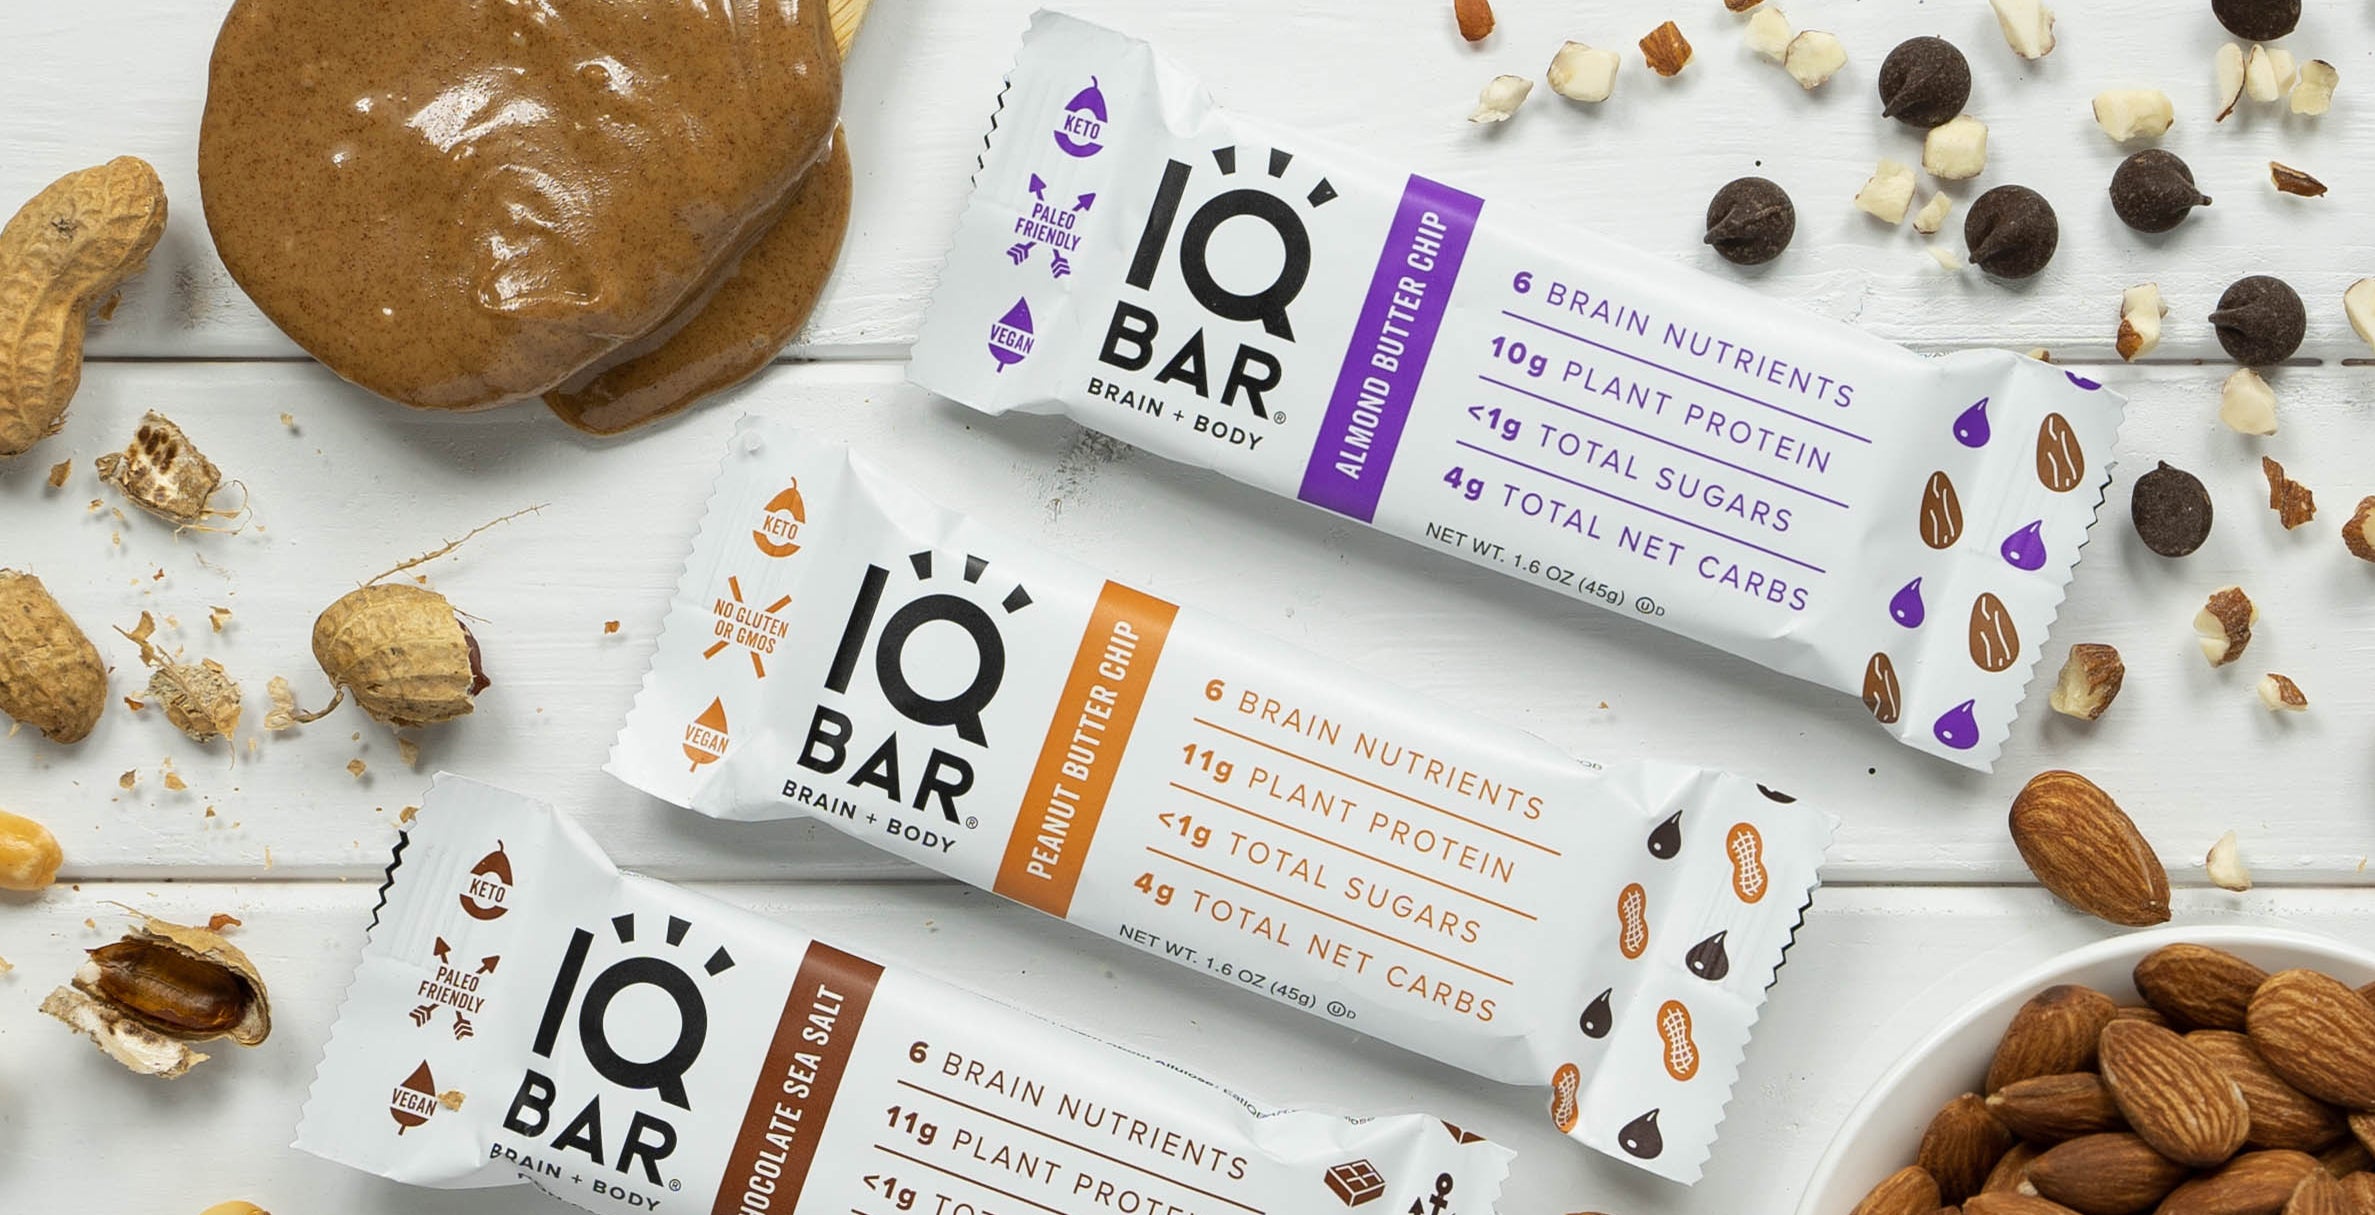 IQ BAR Closes $1 Million Seed Round Funding and Introduces New-and-Improved Recipes